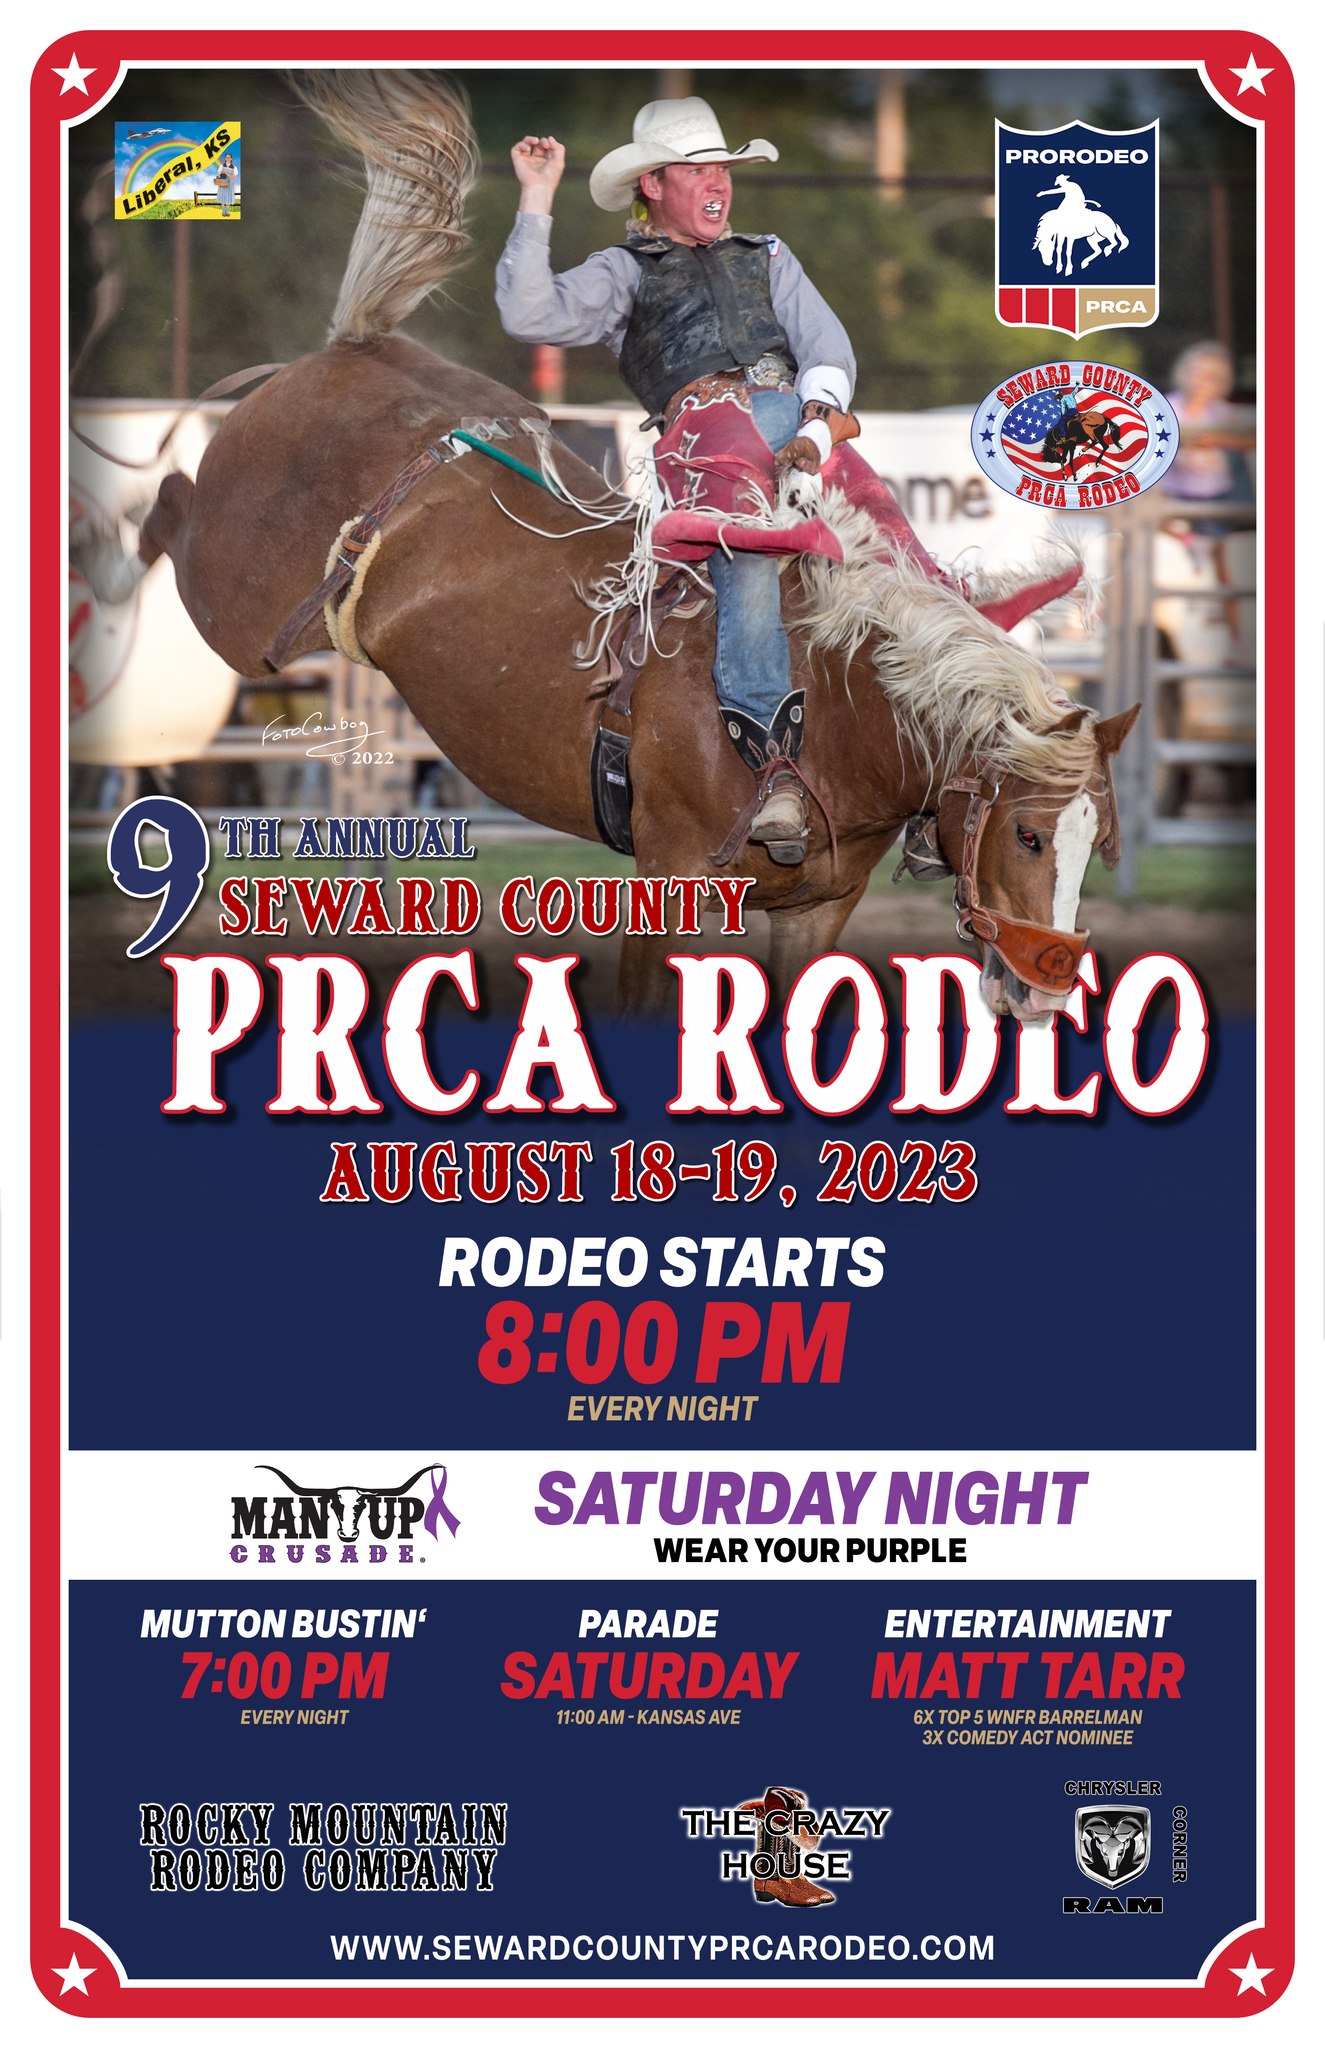 Seward County PRCA Rodeo Schedule of Events